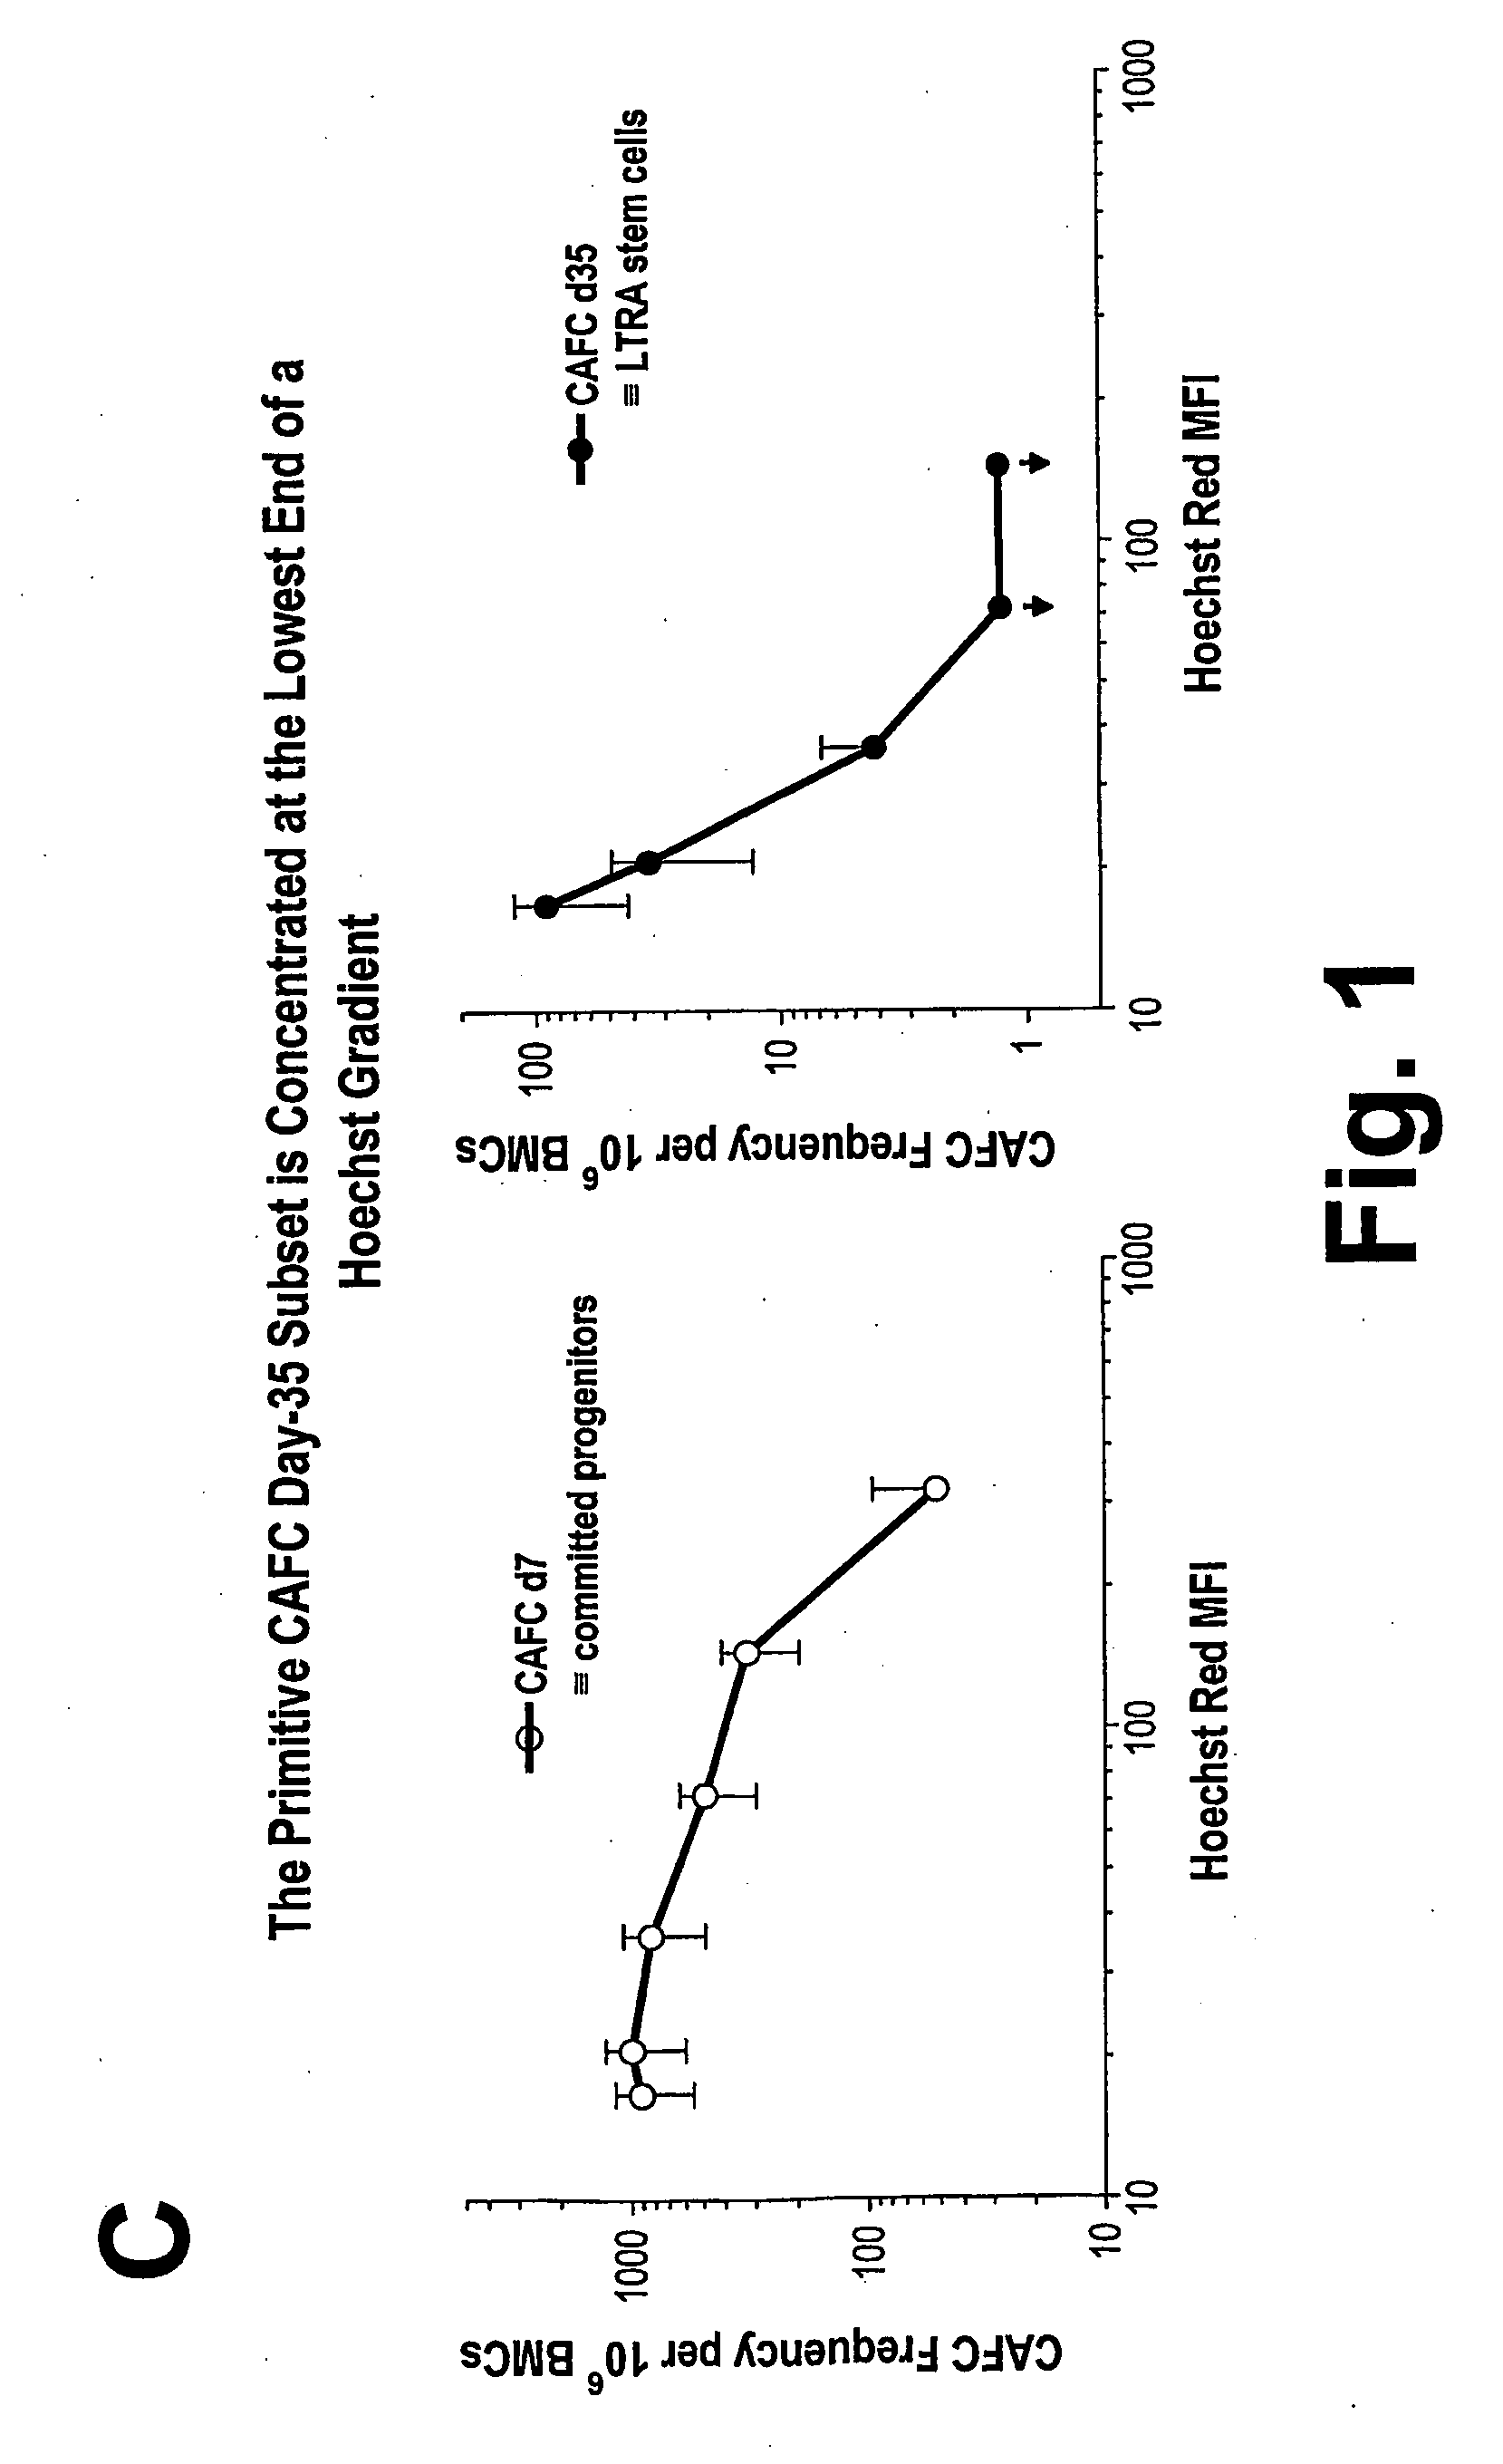 Method for Selectively Depleting Hypoxic Cells